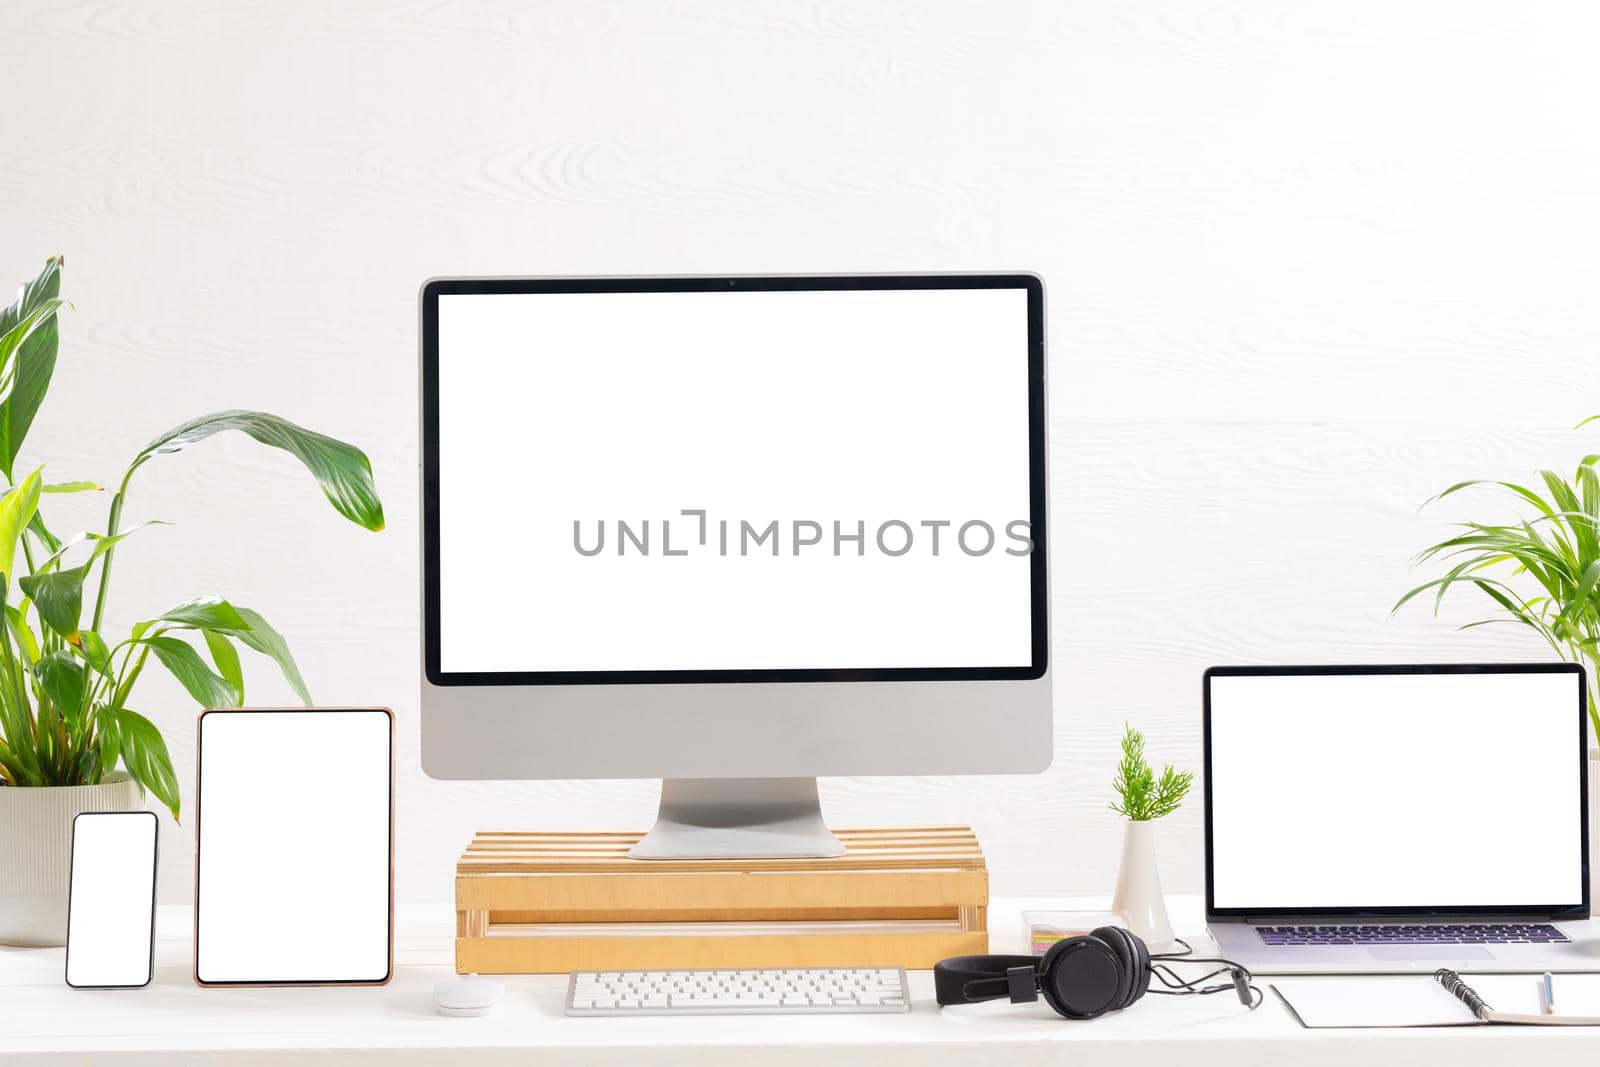 Composition of desktop computer, laptop, tablet and smartphone with copy space on white background. modern office communication and technology concept.